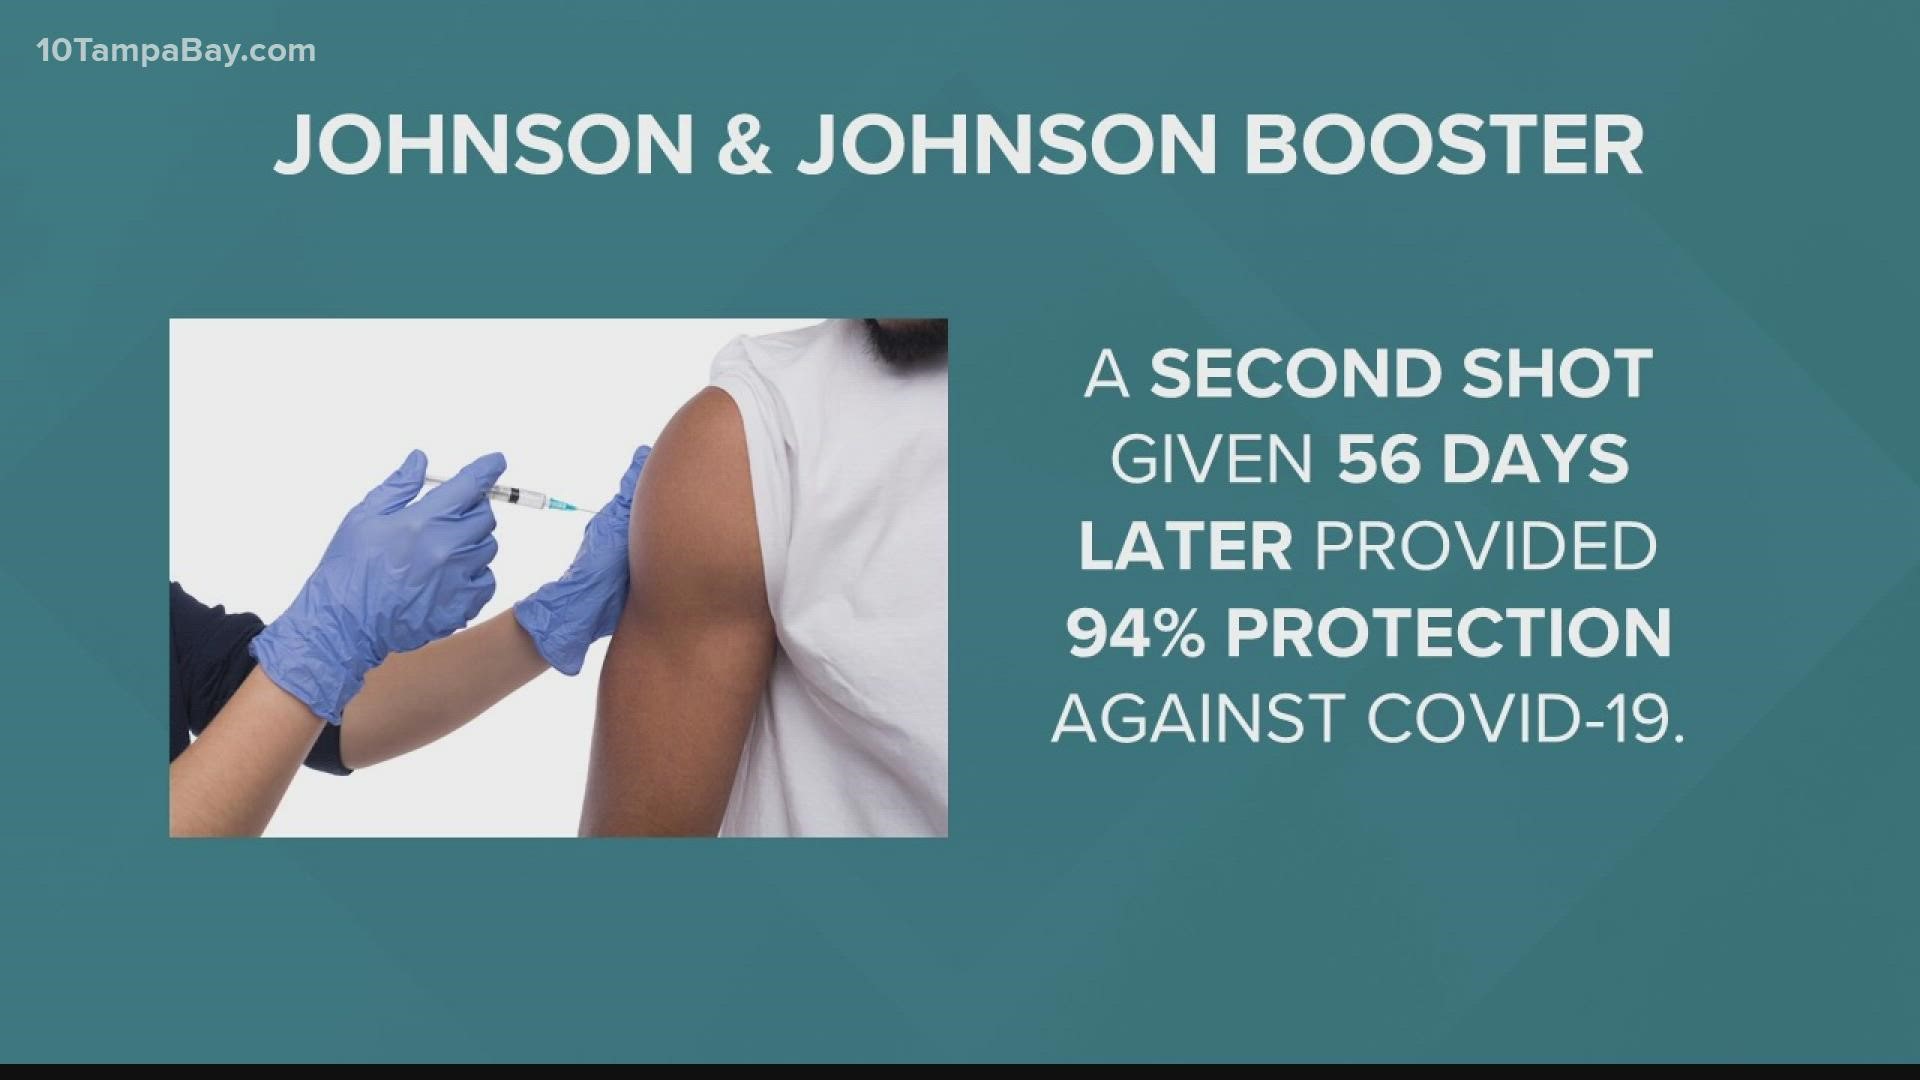 Johnson & Johnson announced a second shot offers stronger protection against COVID-19.